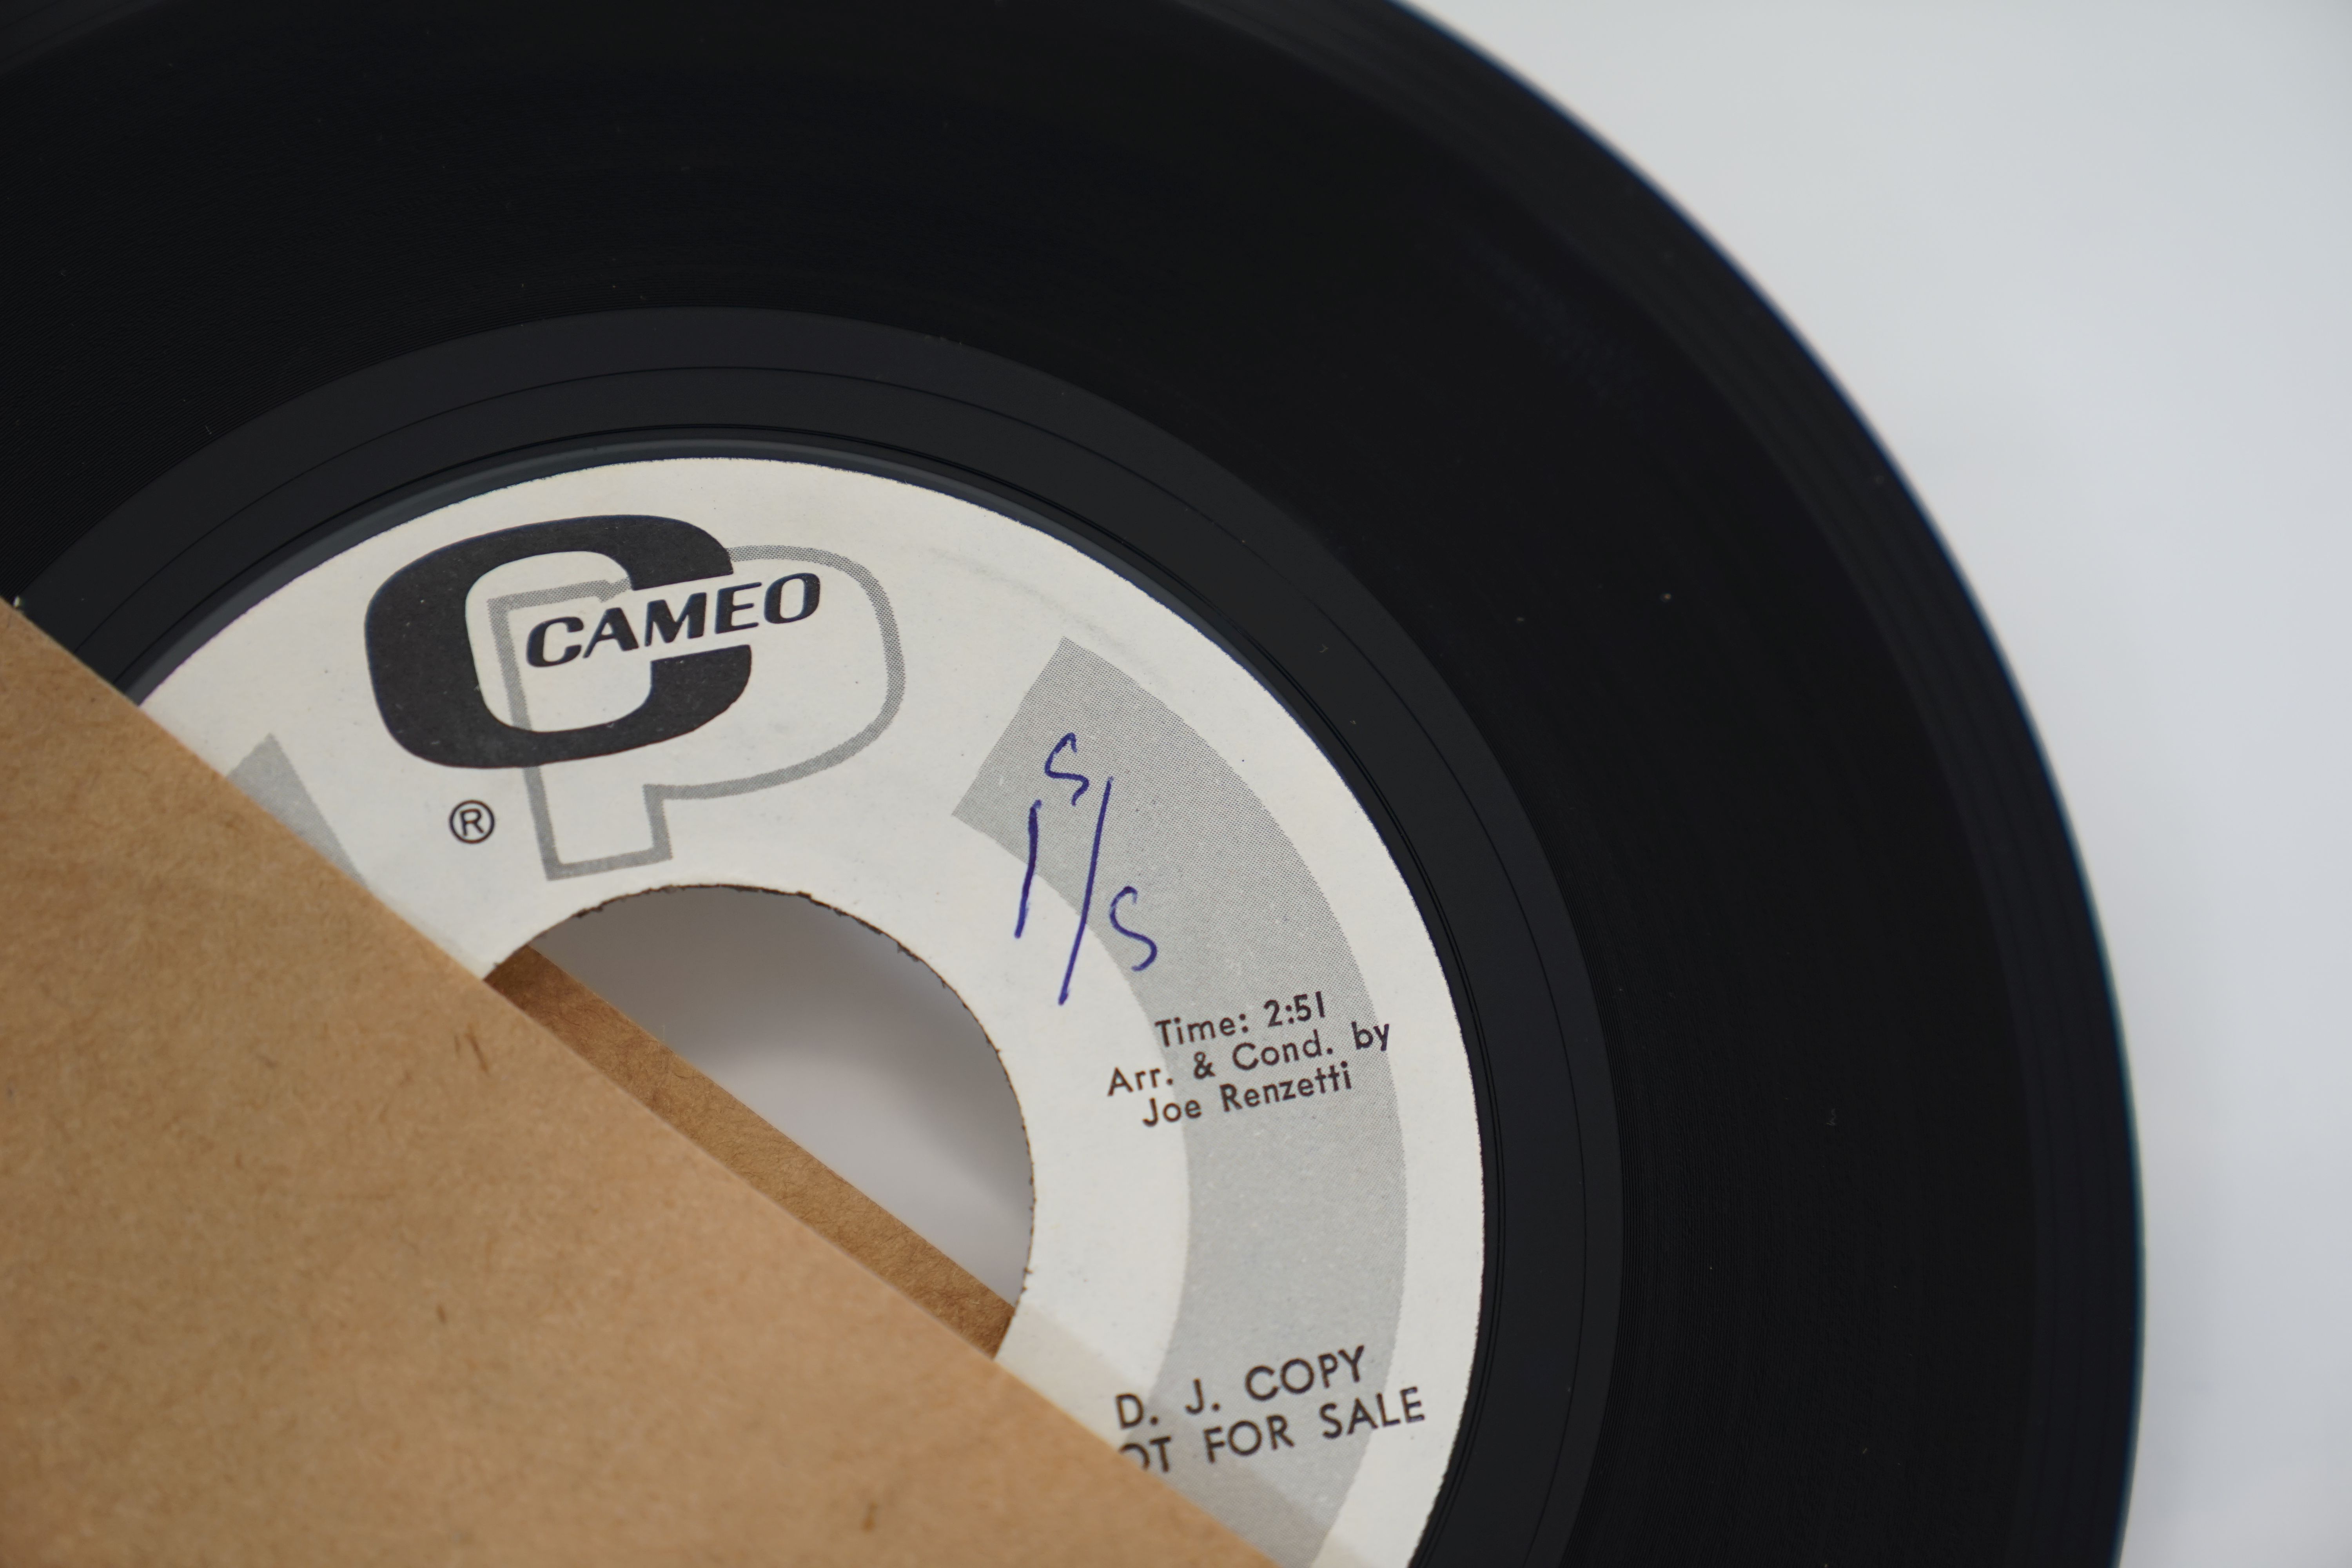 Vinyl - 3 rare Original US 1st pressing Northern Soul single on the Cameo Parkway label. The Sweet - Image 17 of 17